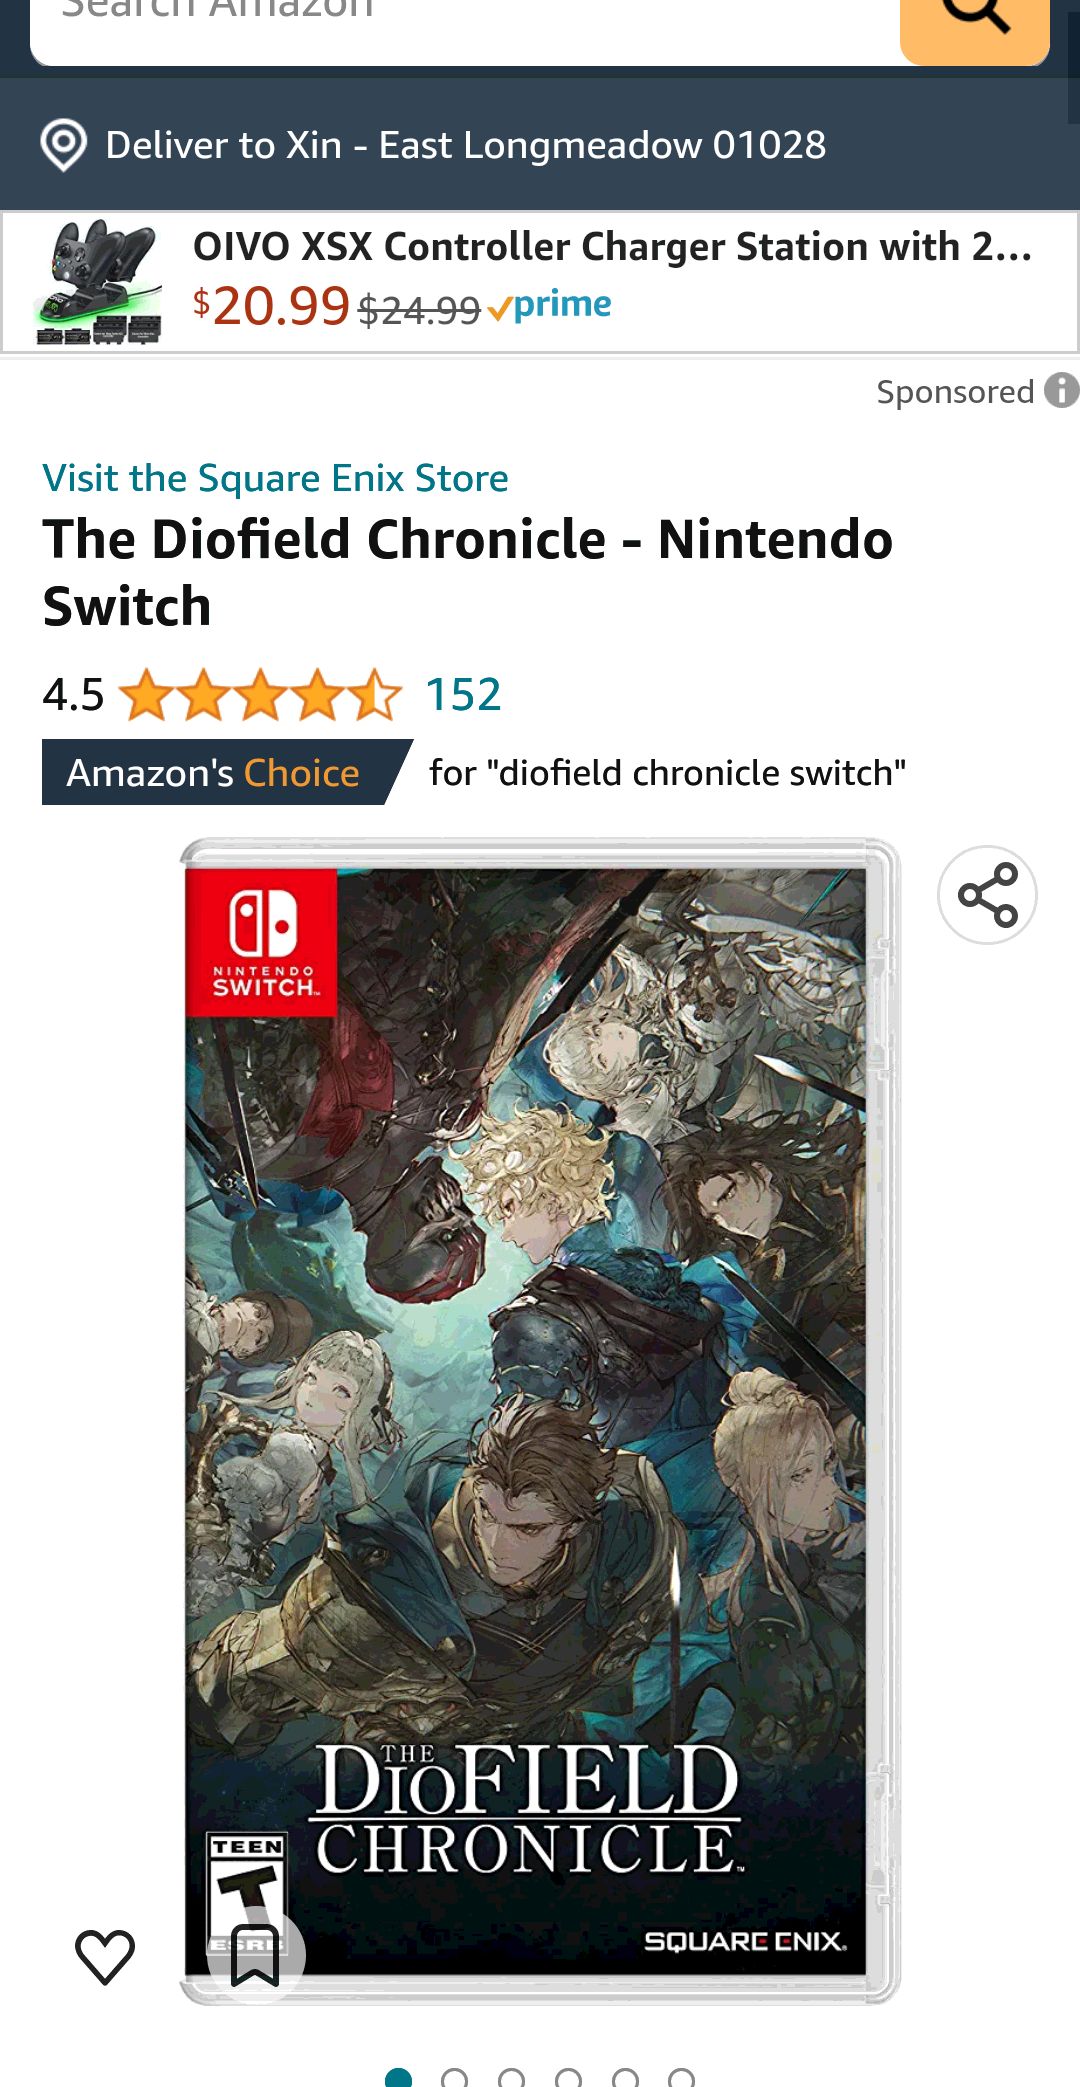 The Diofield Chronicle - Nintendo Switch : Square Enix LLC: Everything Else神领编年史